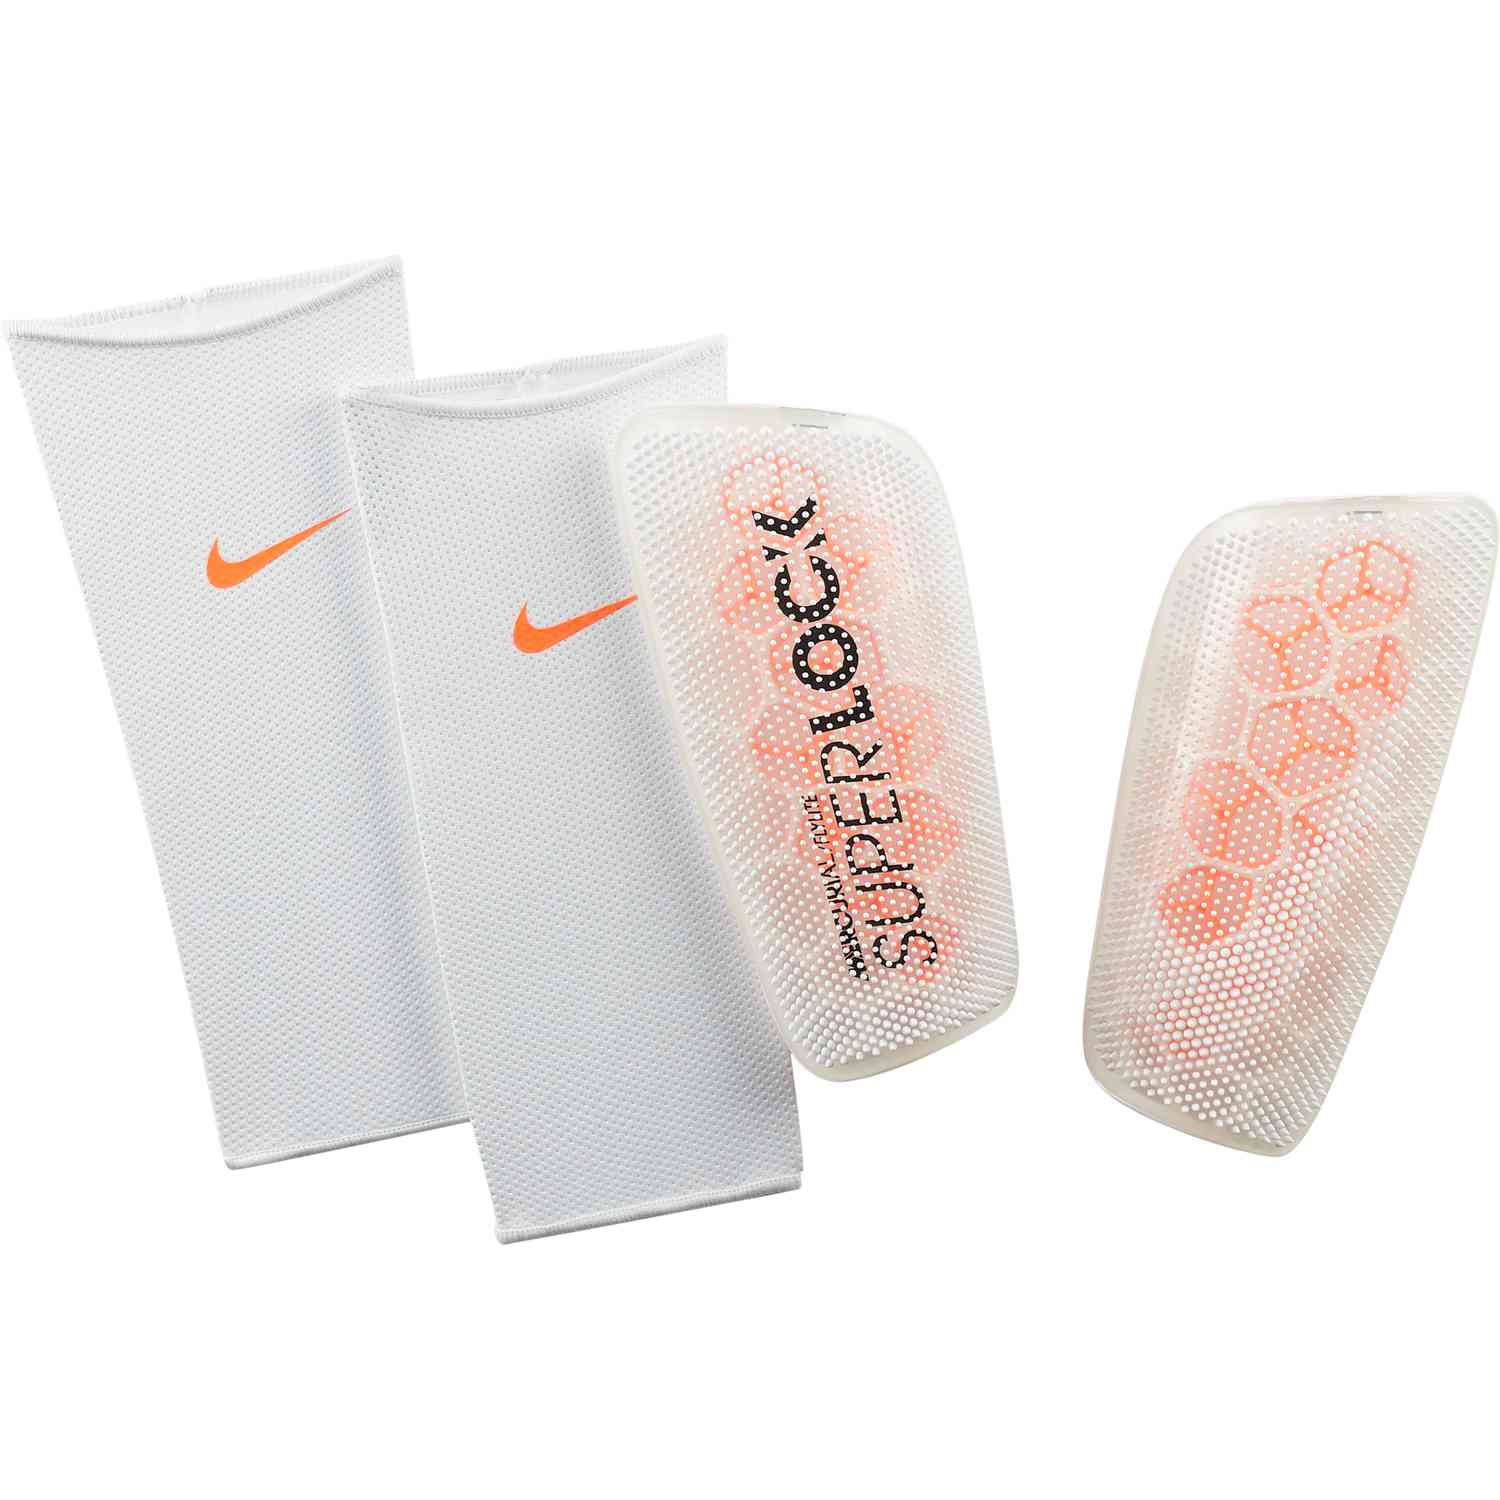 Than Repeated Caution Nike Mercurial Flylite Superlock Shin Guards - Euphoria Pack - Soccer Master